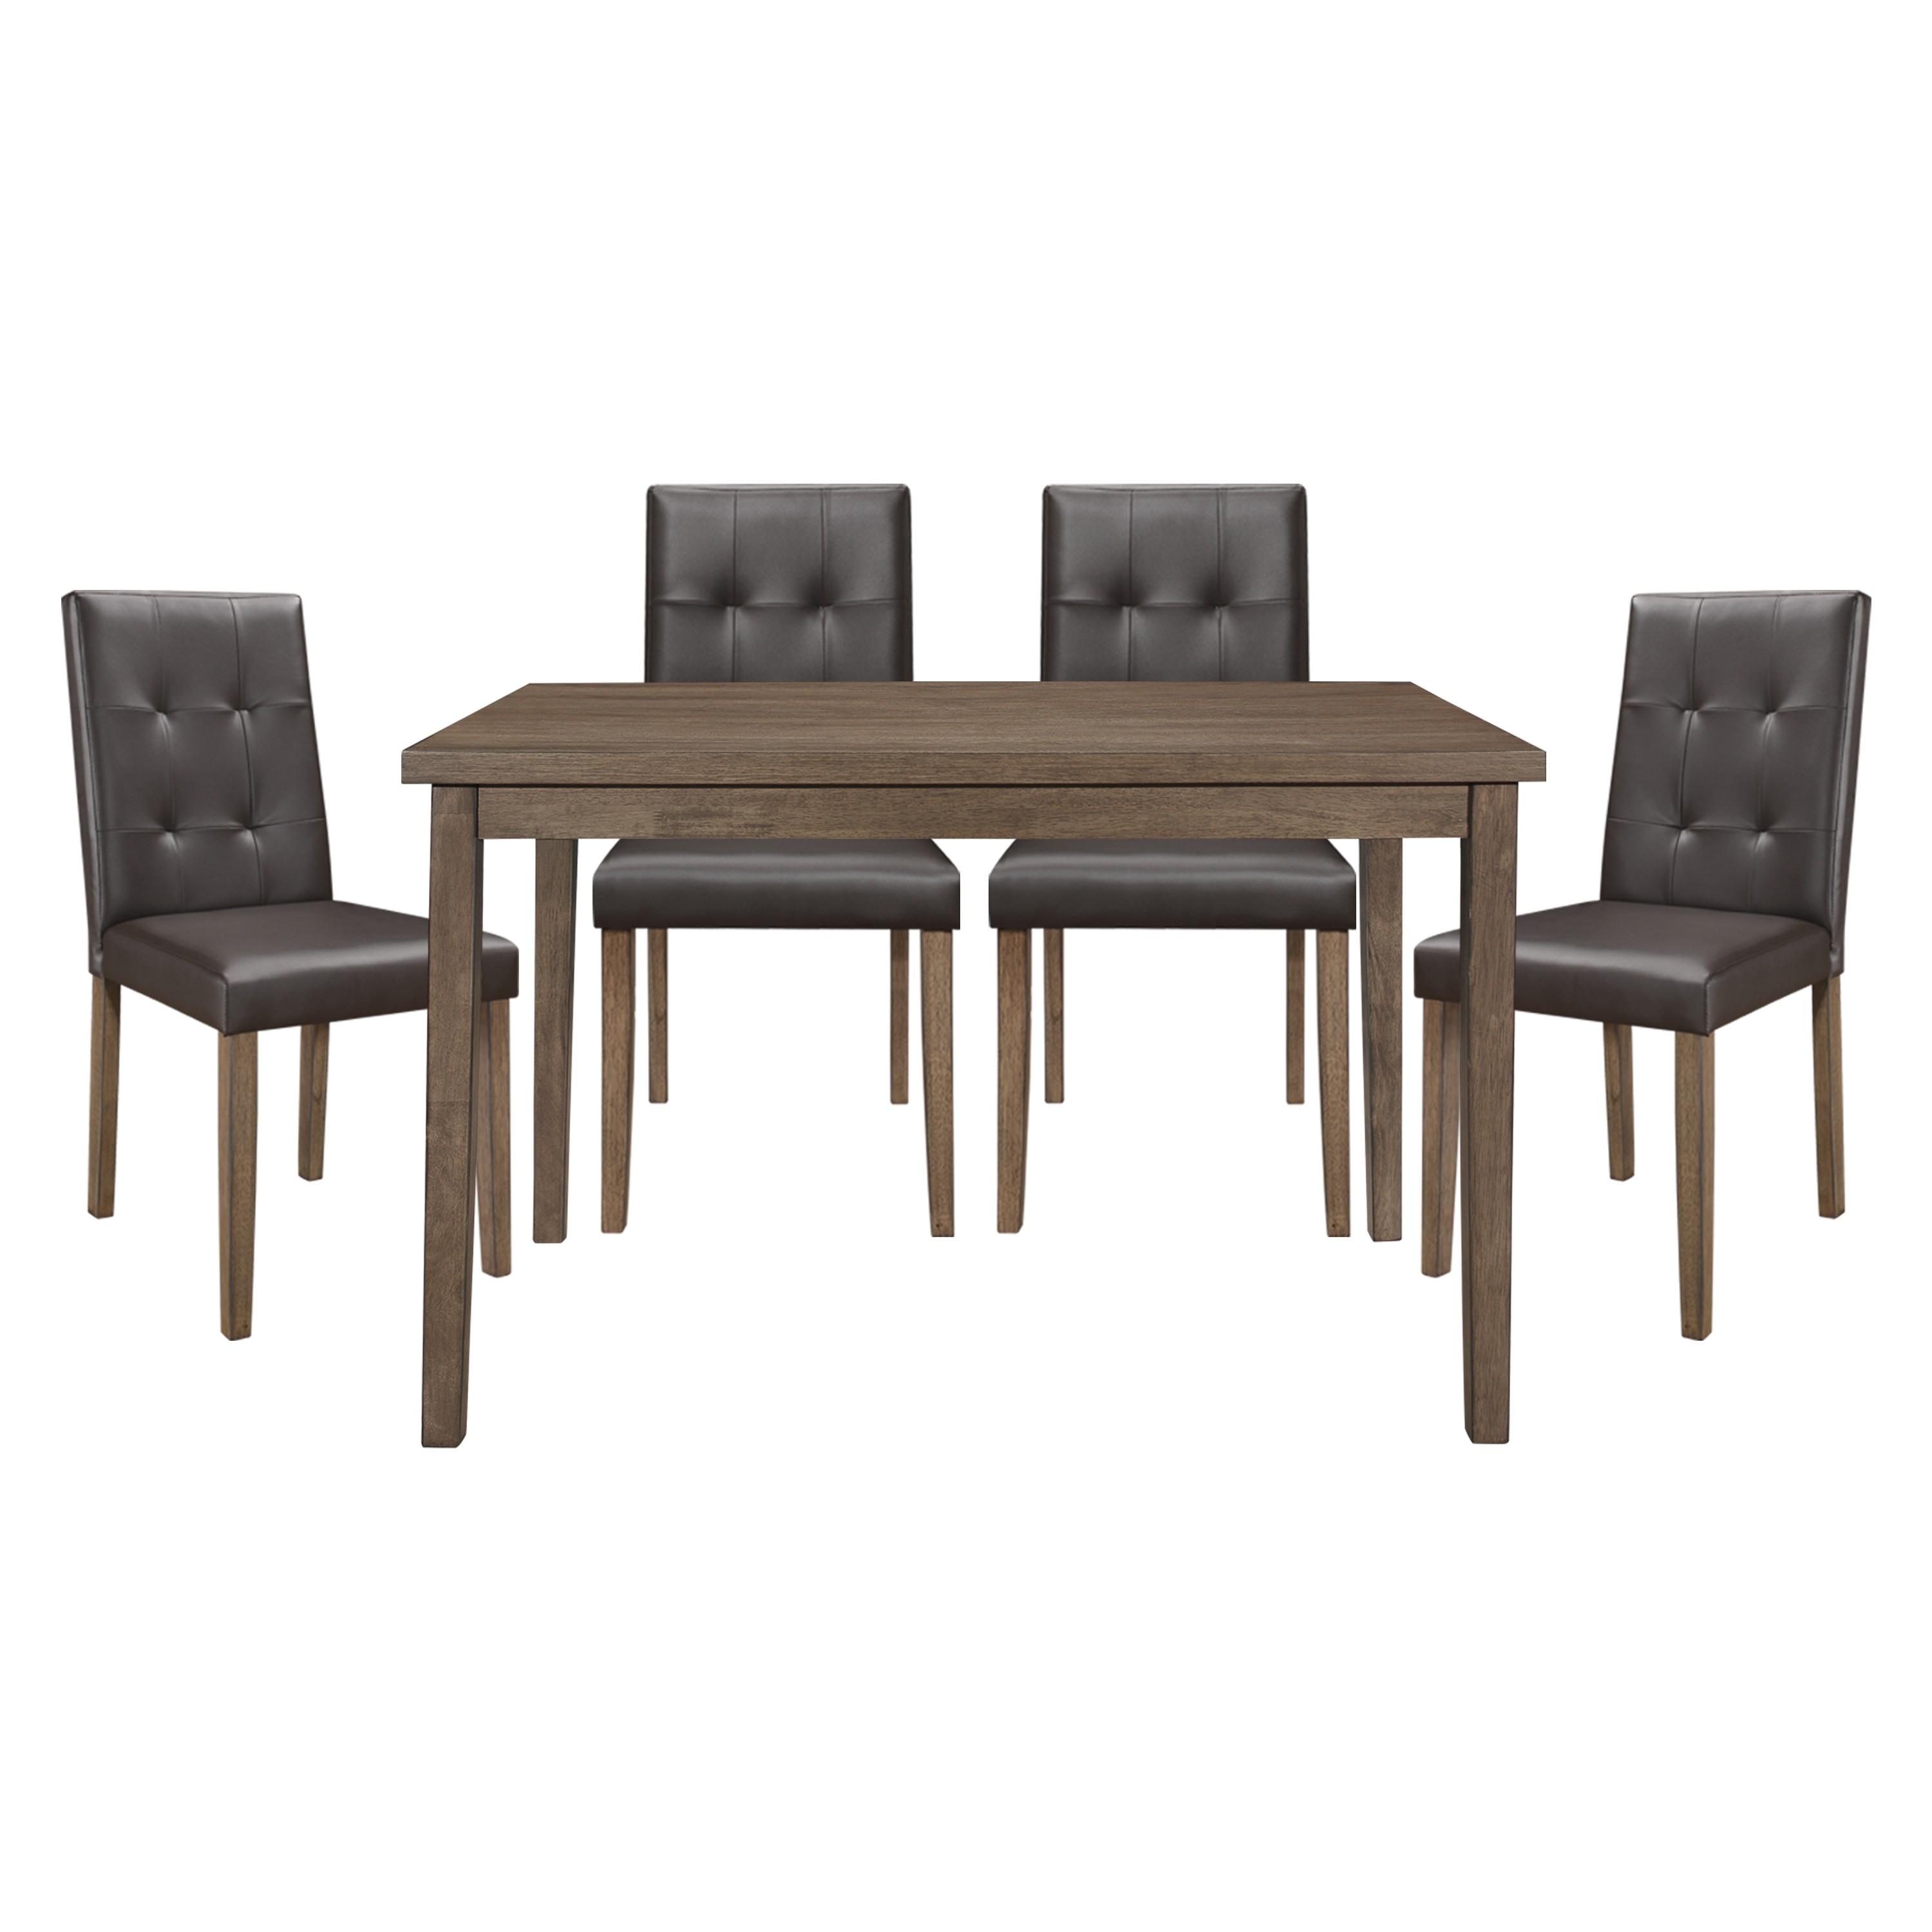 Transitional Dining Room Set 5039BR-48*5PC Ahmet 5039BR-48*5PC in Walnut Faux Leather